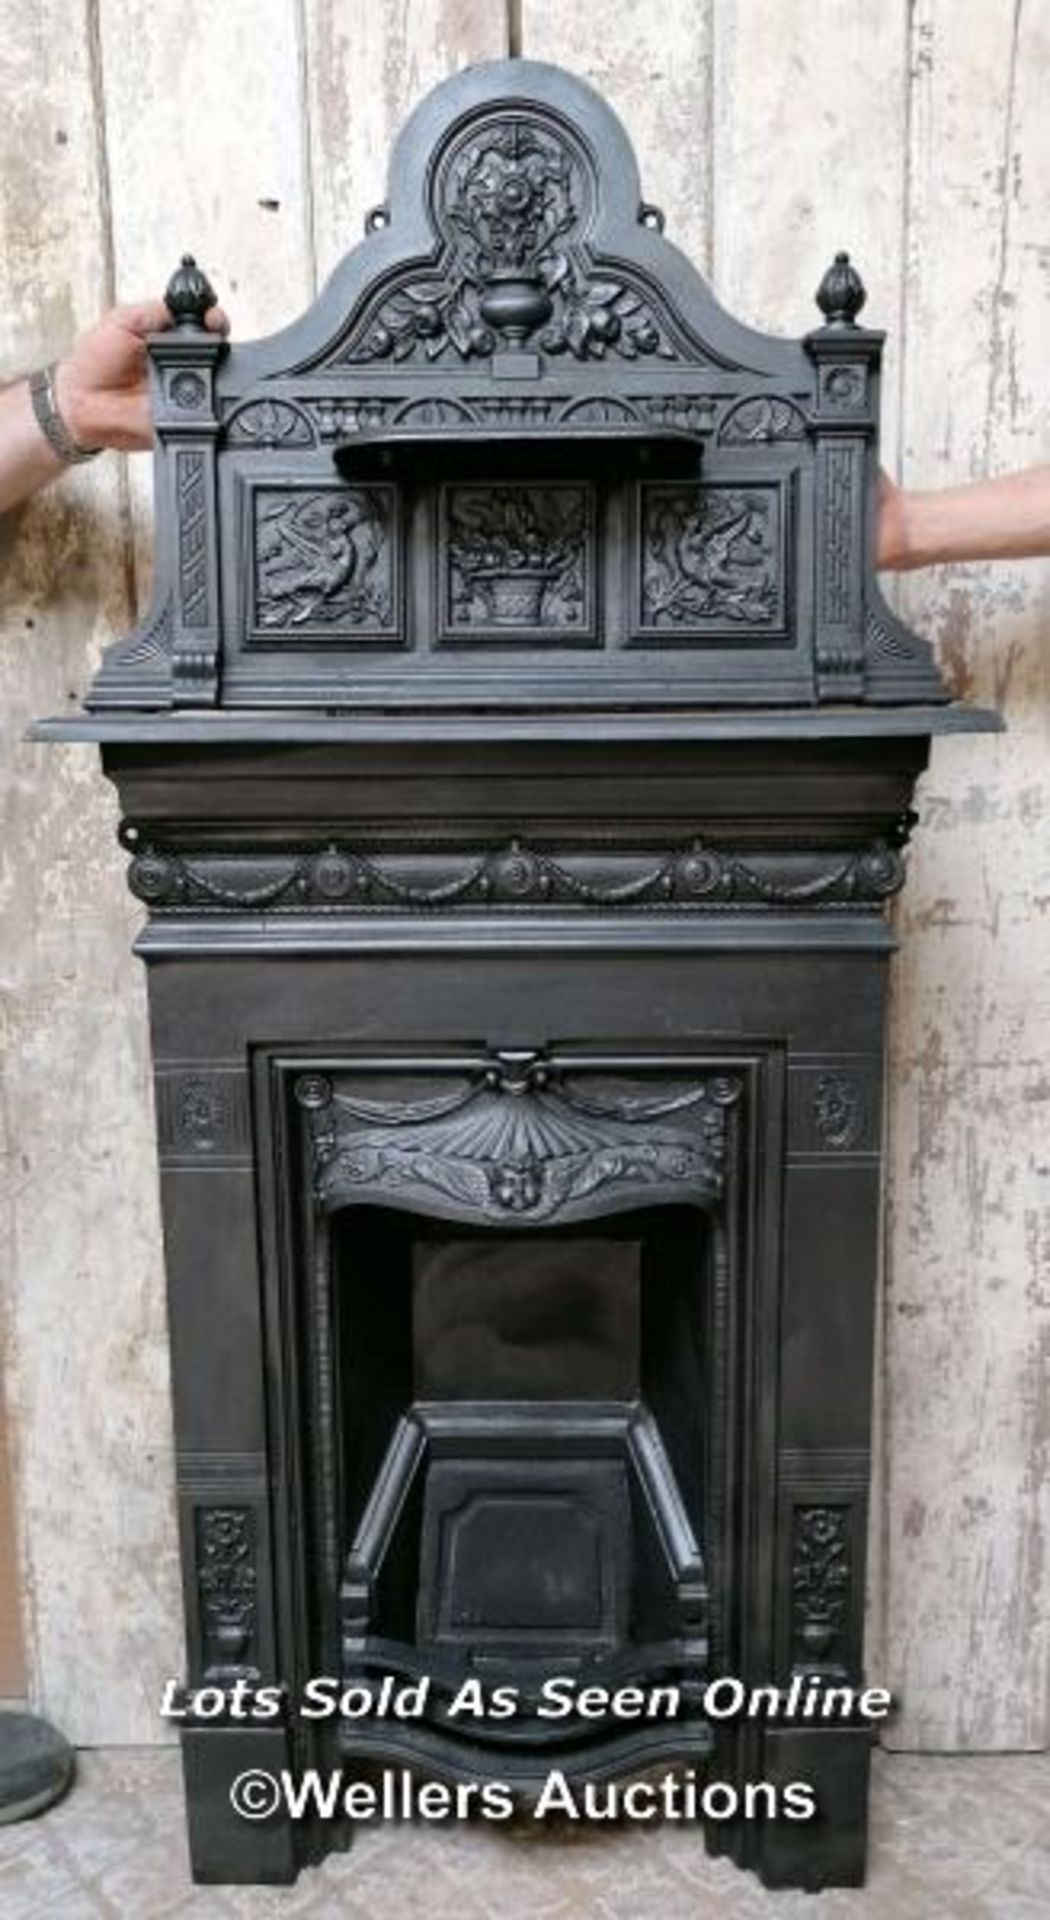 Original Victorian Cast iron bedroom fireplace. Combination design with decorative top with angel or